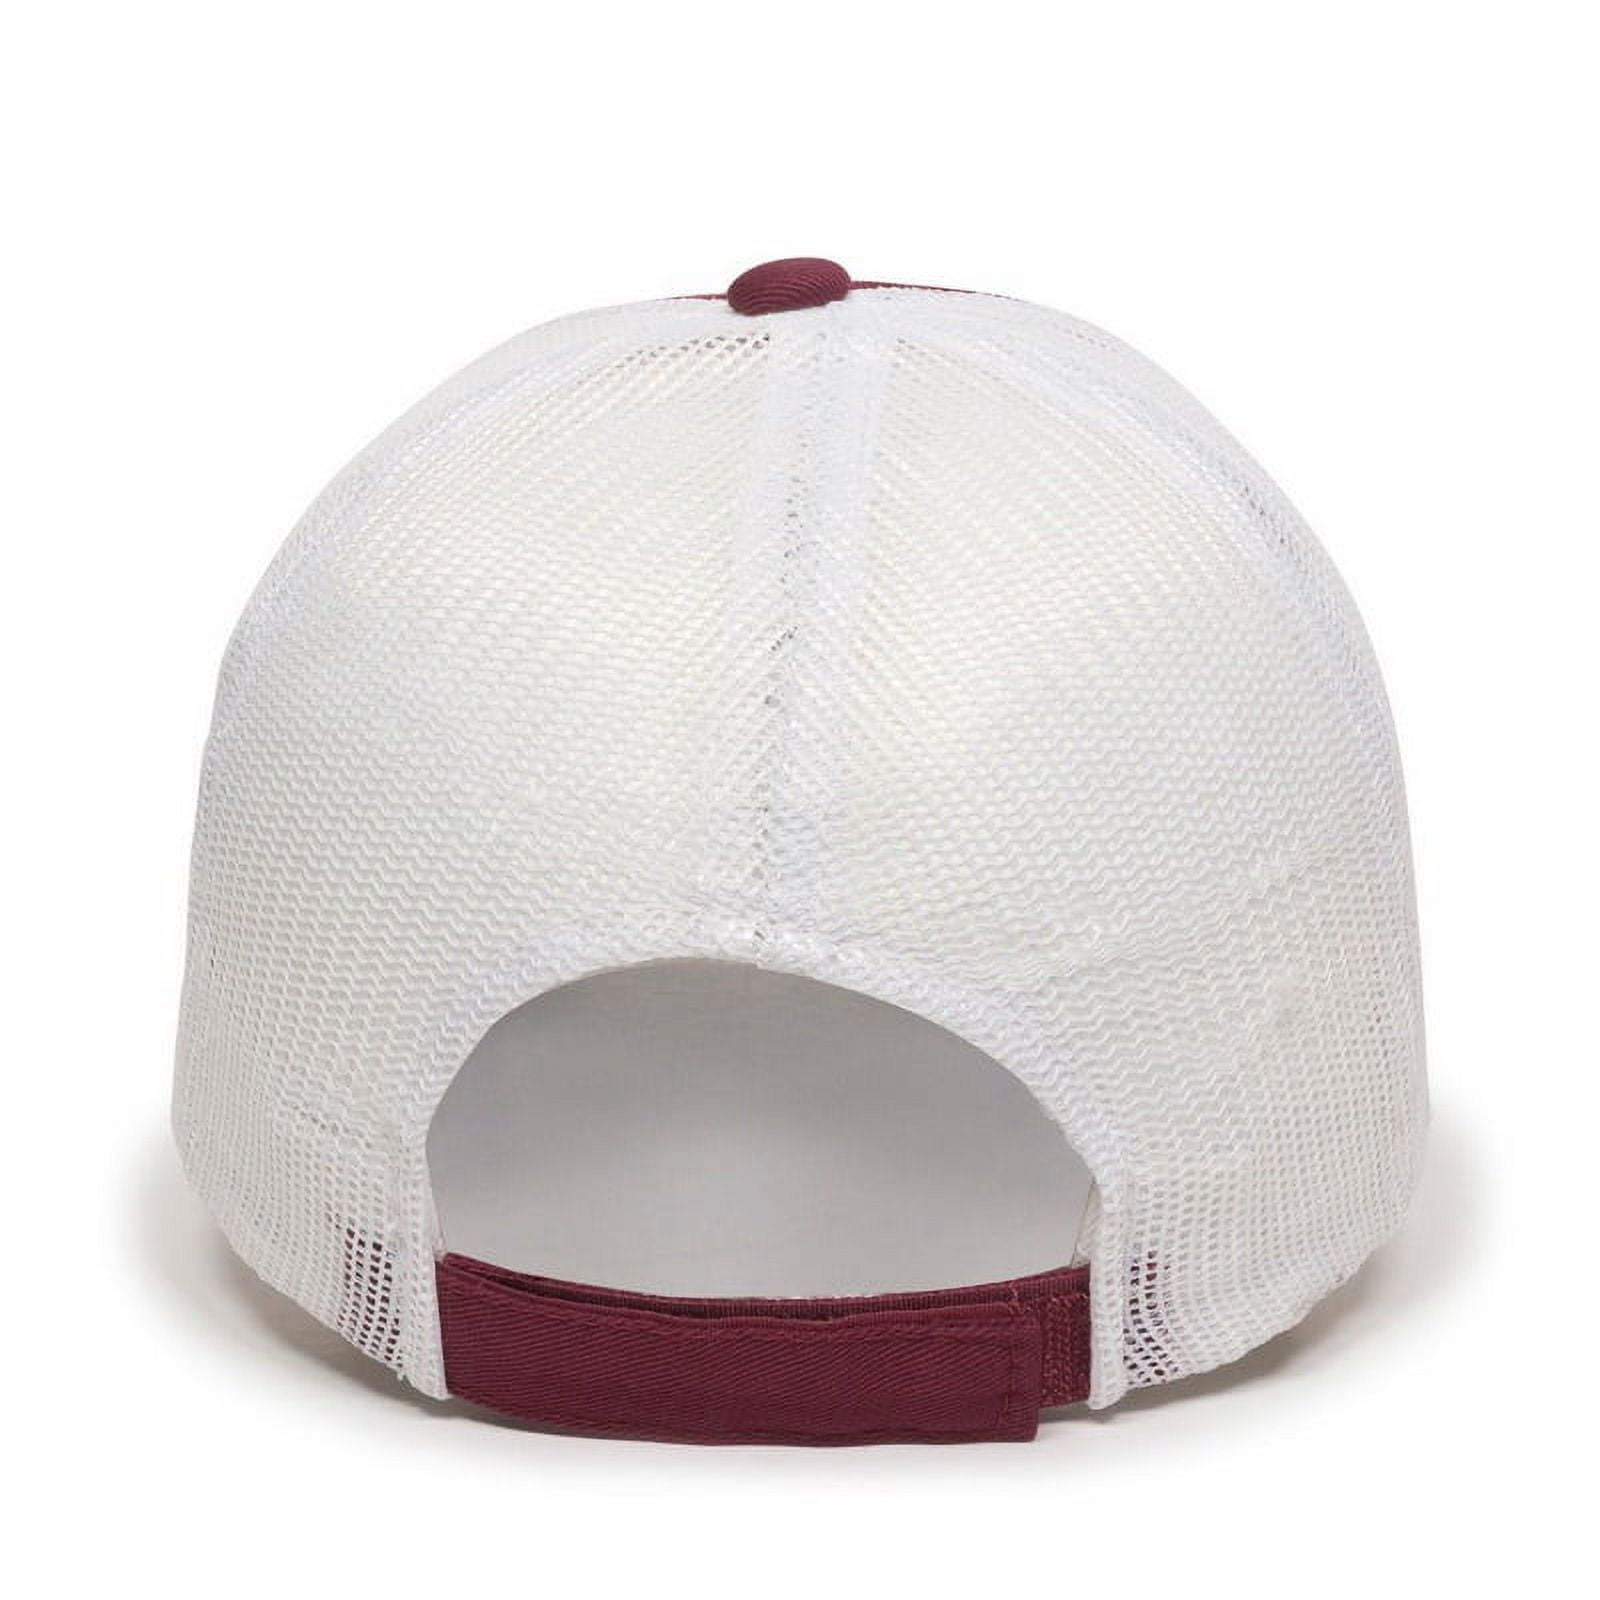 Outdoor Cap FWT-130 Heavy Garment Washed, Mesh Back-burgundy/white